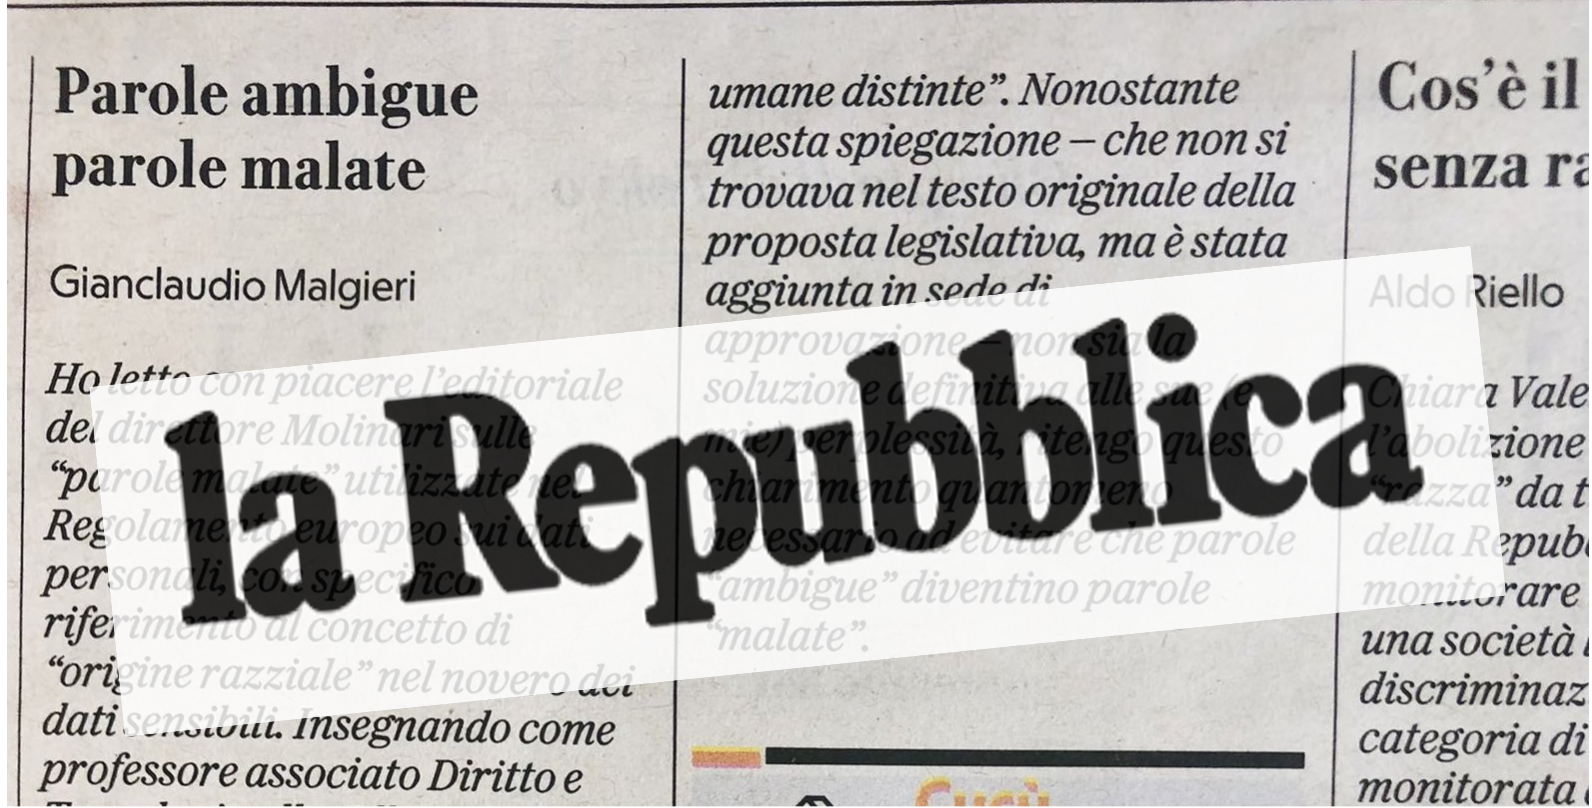 Malgieri on “La Repubblica” in reply to the Editor : “the term “racial” in the GDPR has no racist intentions”